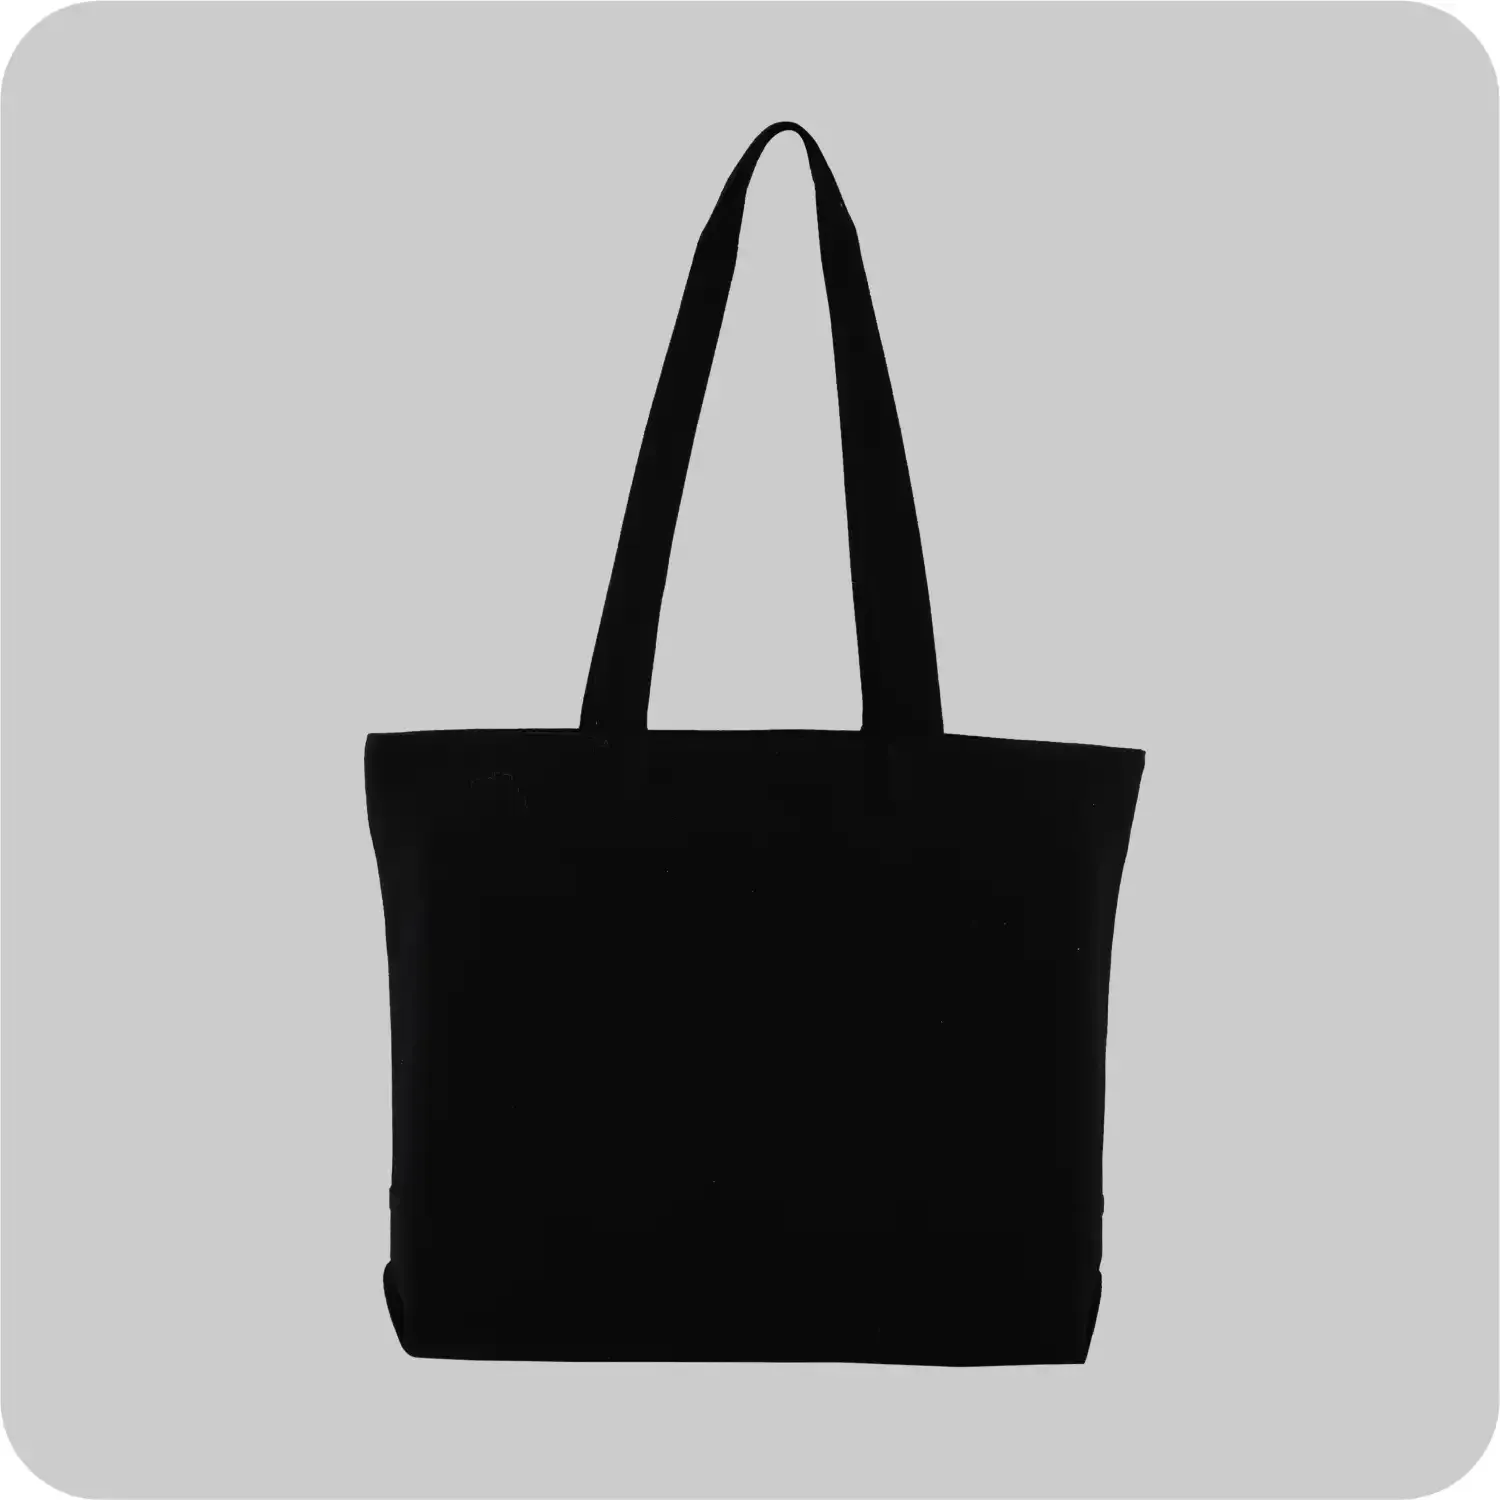 Black Canvas Bags, Convenient Multi utility bags, with Affordable Price